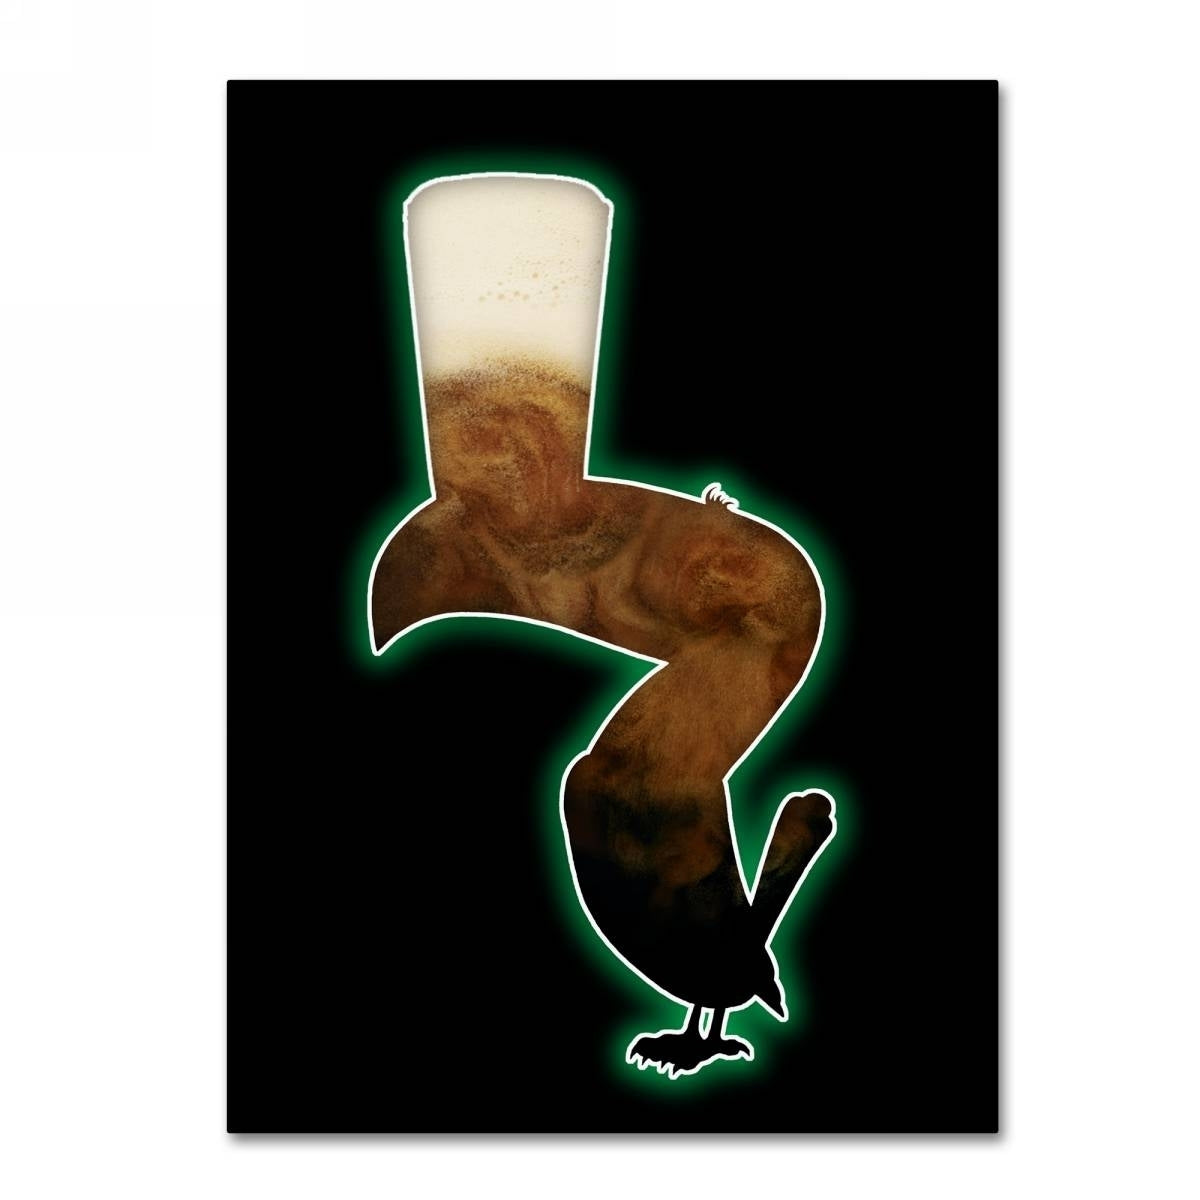 A Guinness beer mug adorned with a Toucan, depicted on Guinness Brewery 'Guinness X' Canvas Art.